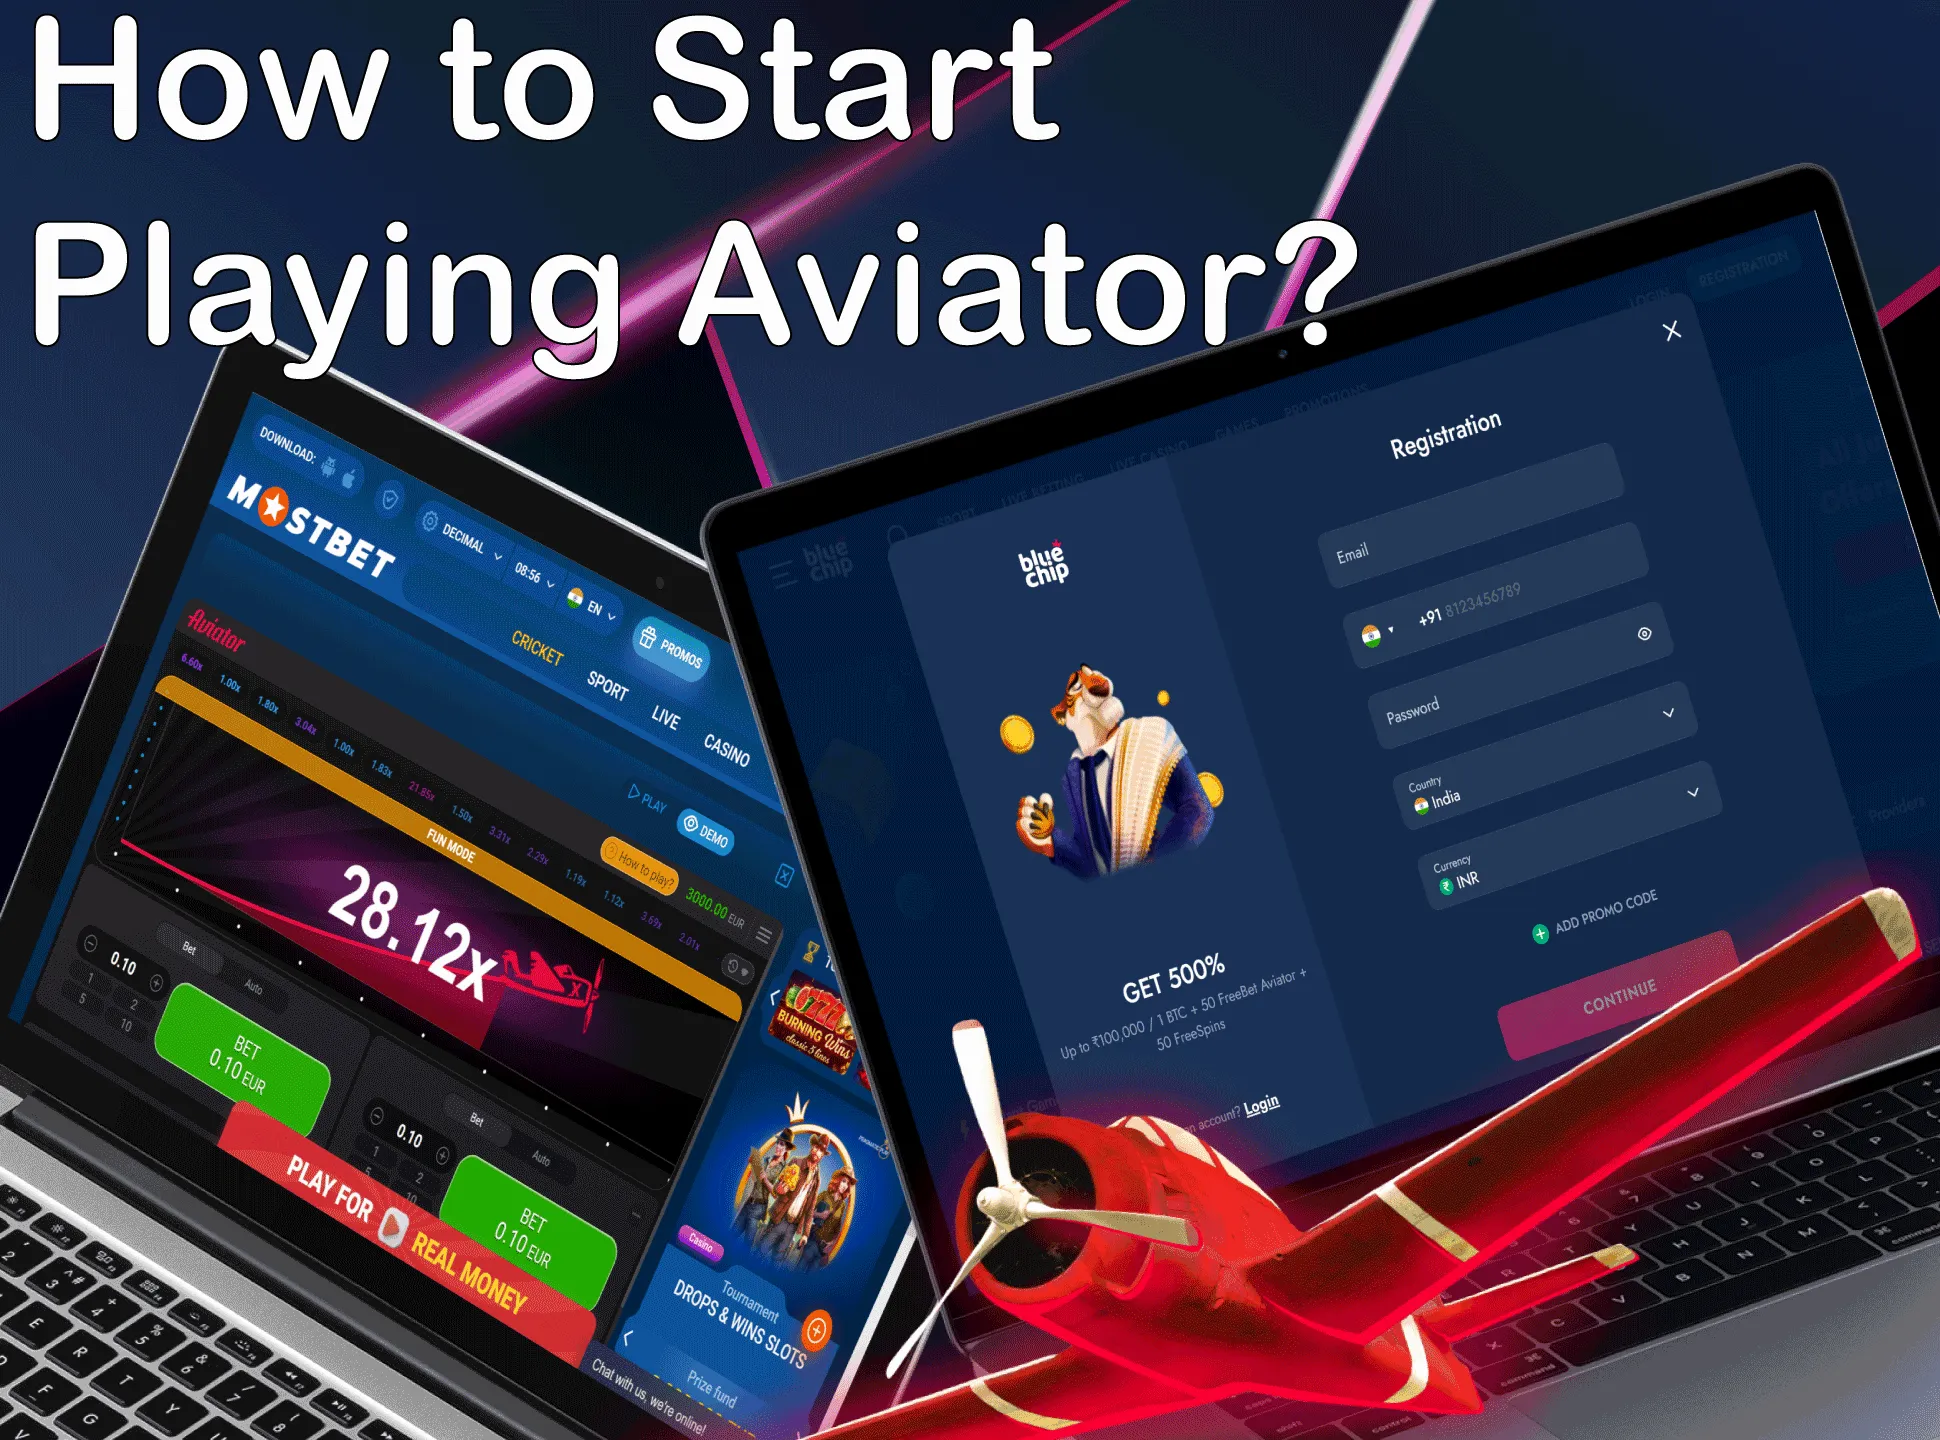 Start playing the Aviator game after registering your account.